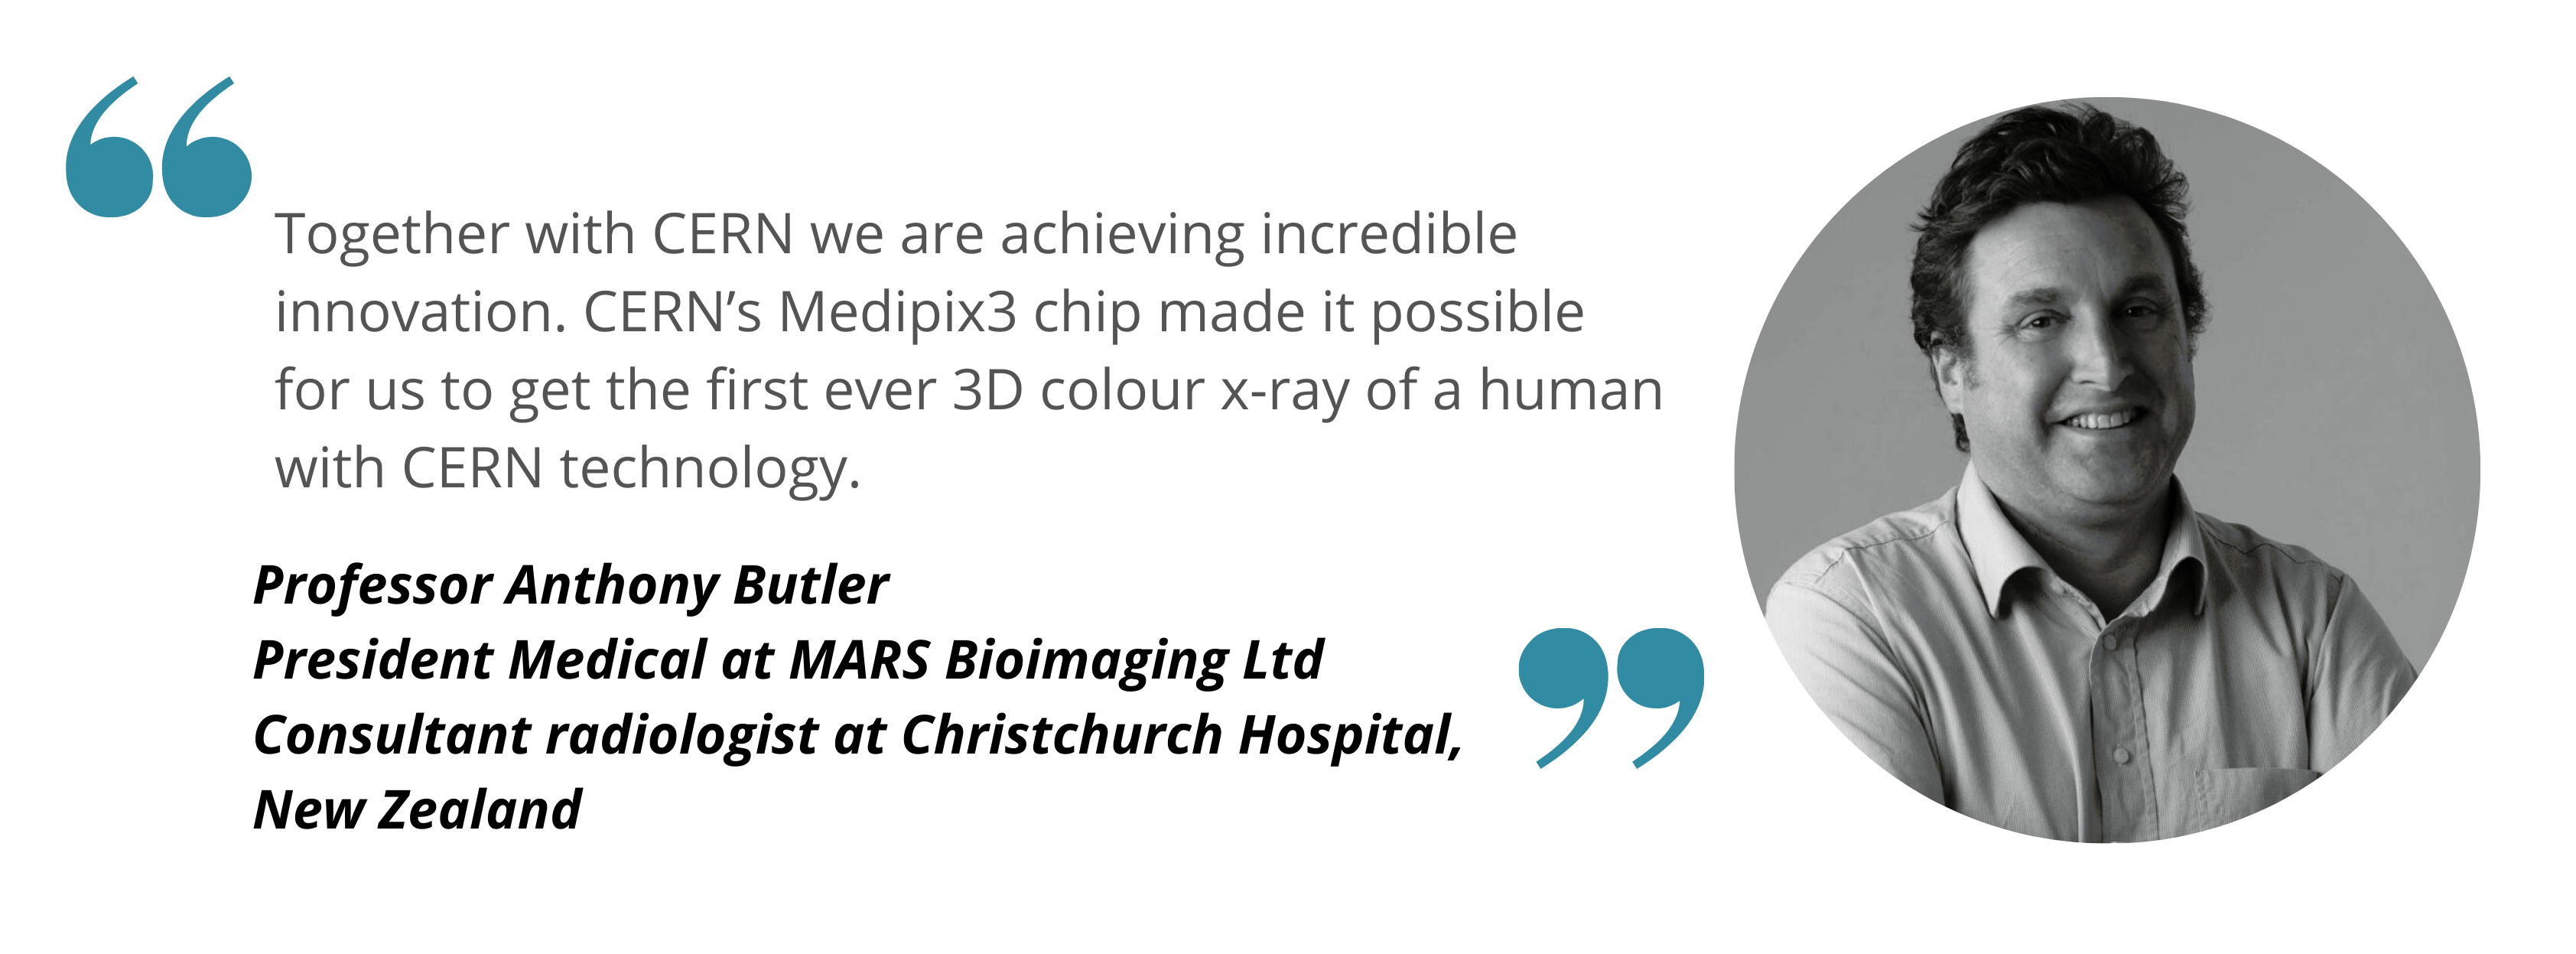 Anthony Together with CERN we are achieving incredible innovation. CERN’s Medipix3 chip made it possible for us to get the first ever 3D colour x-ray of a human with CERN technology. 